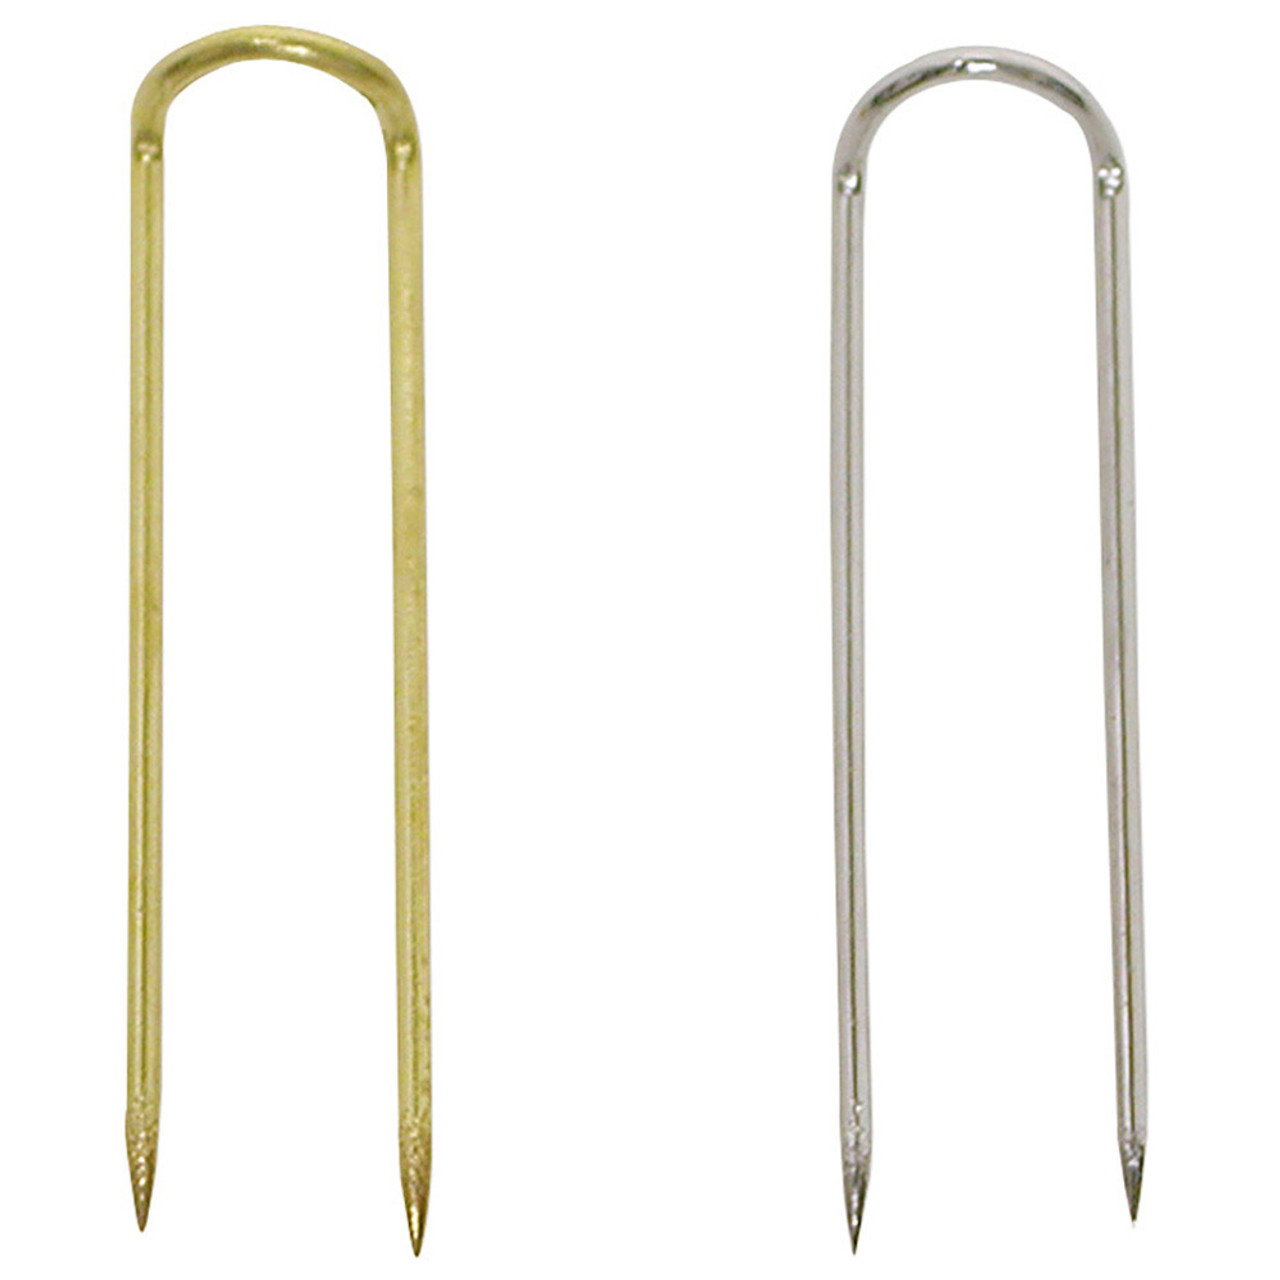 Gold and Silver U-Pins for Jewelry (19 & 19S) Price for 1000pcs